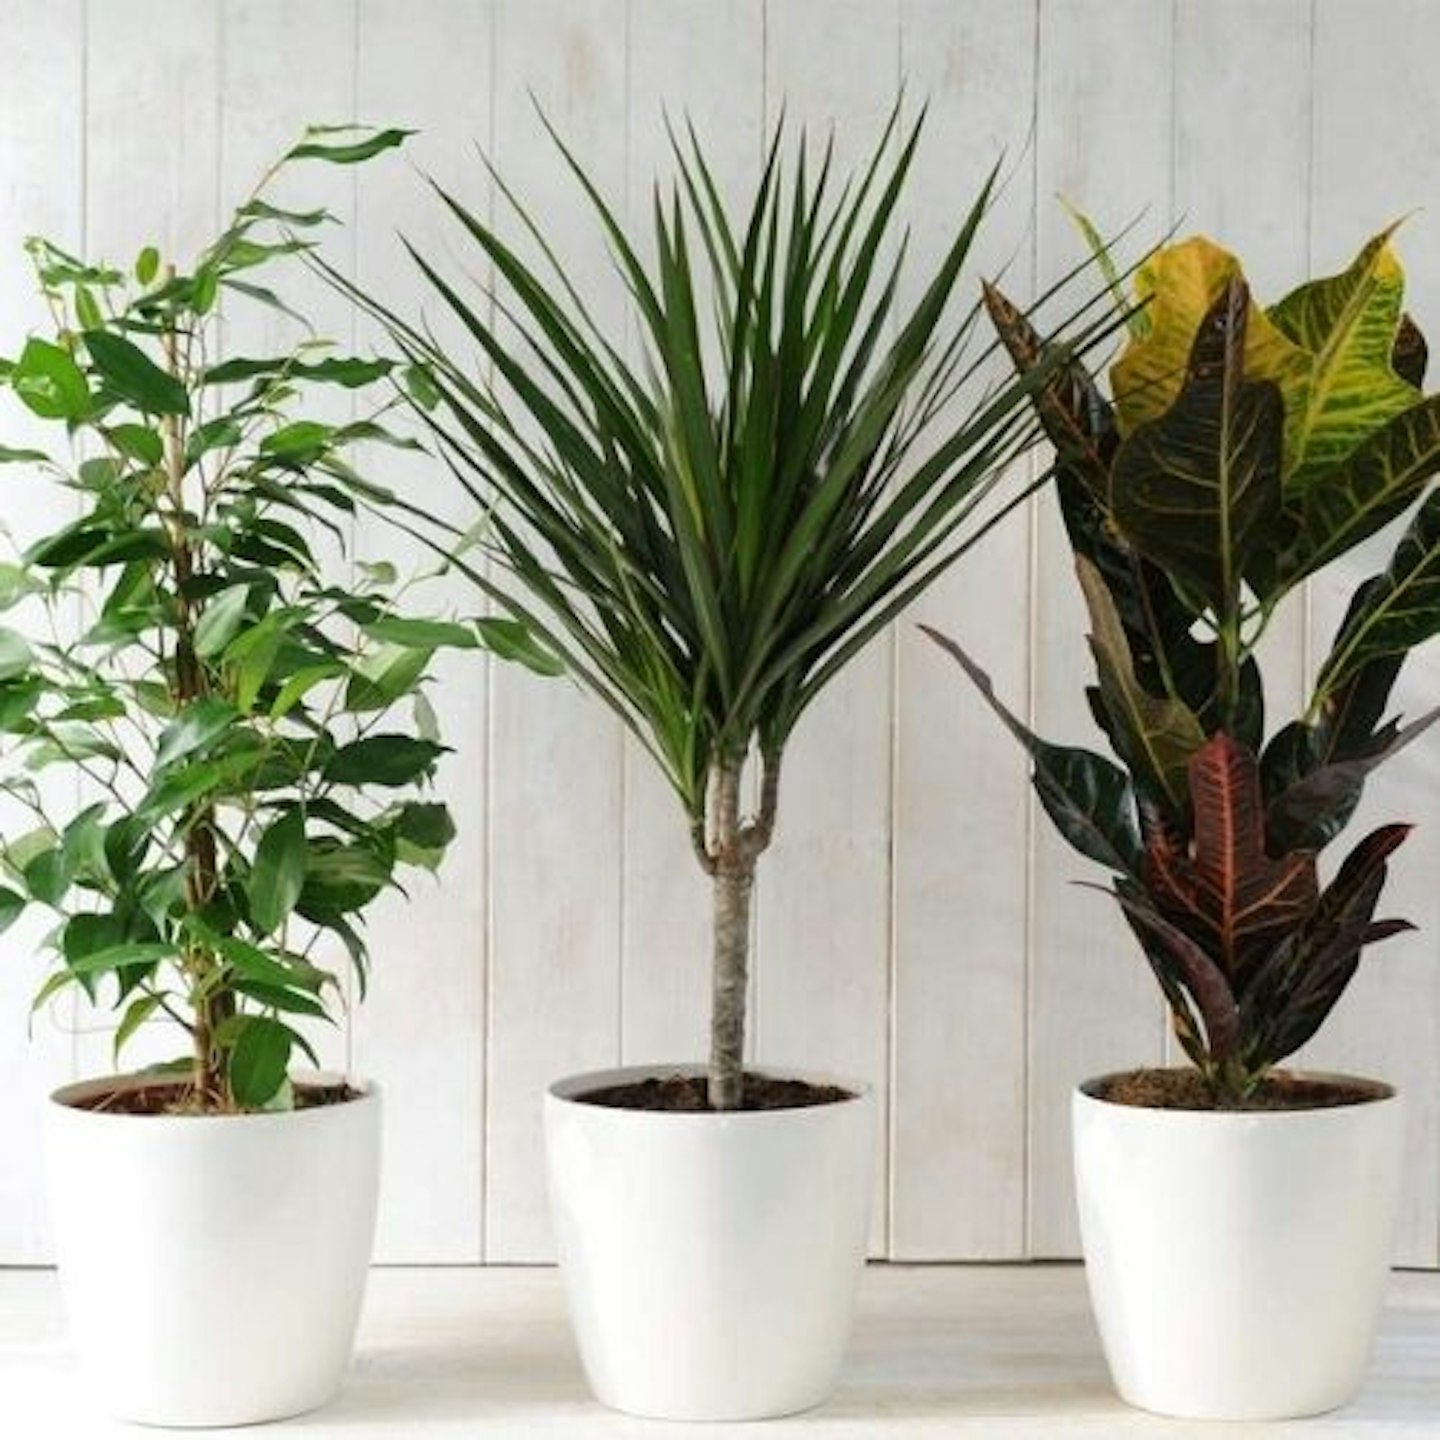 Evergreen Indoor House Plants Collection - 3 x Scandi Houseplant Lucky Dip